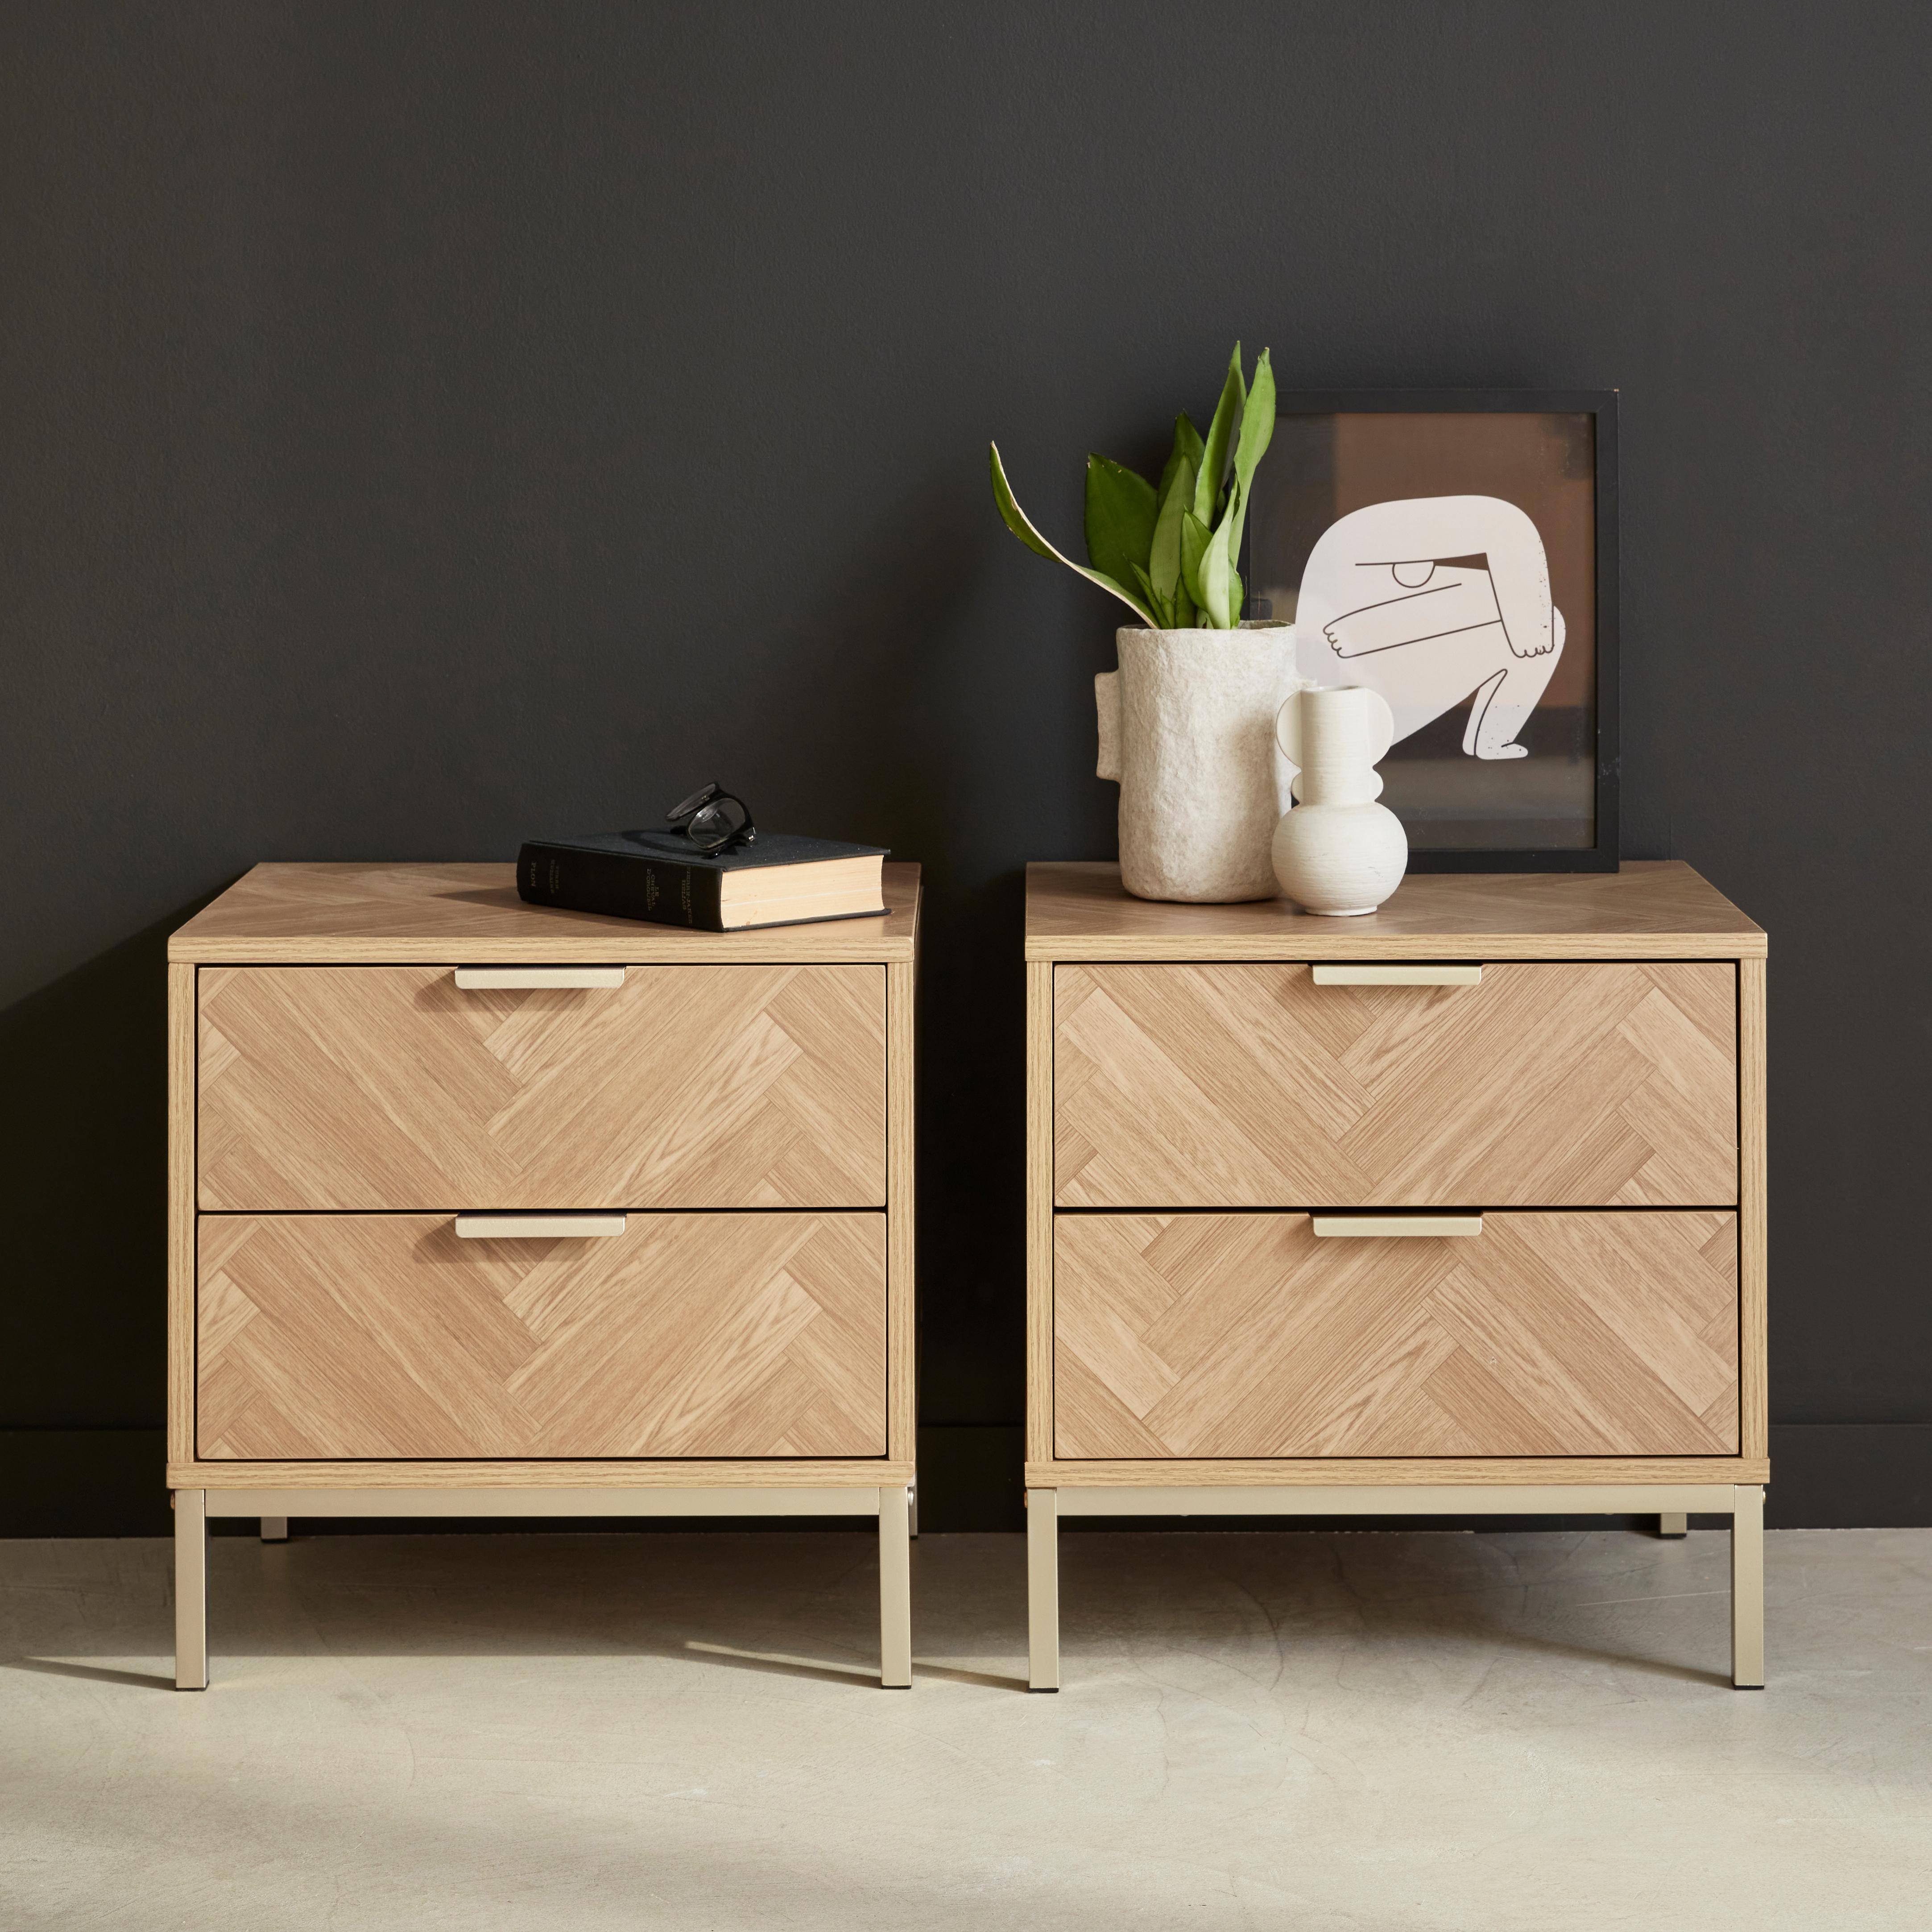 Pair of  contemporary Herringbone bedside table with 2 drawers Photo2